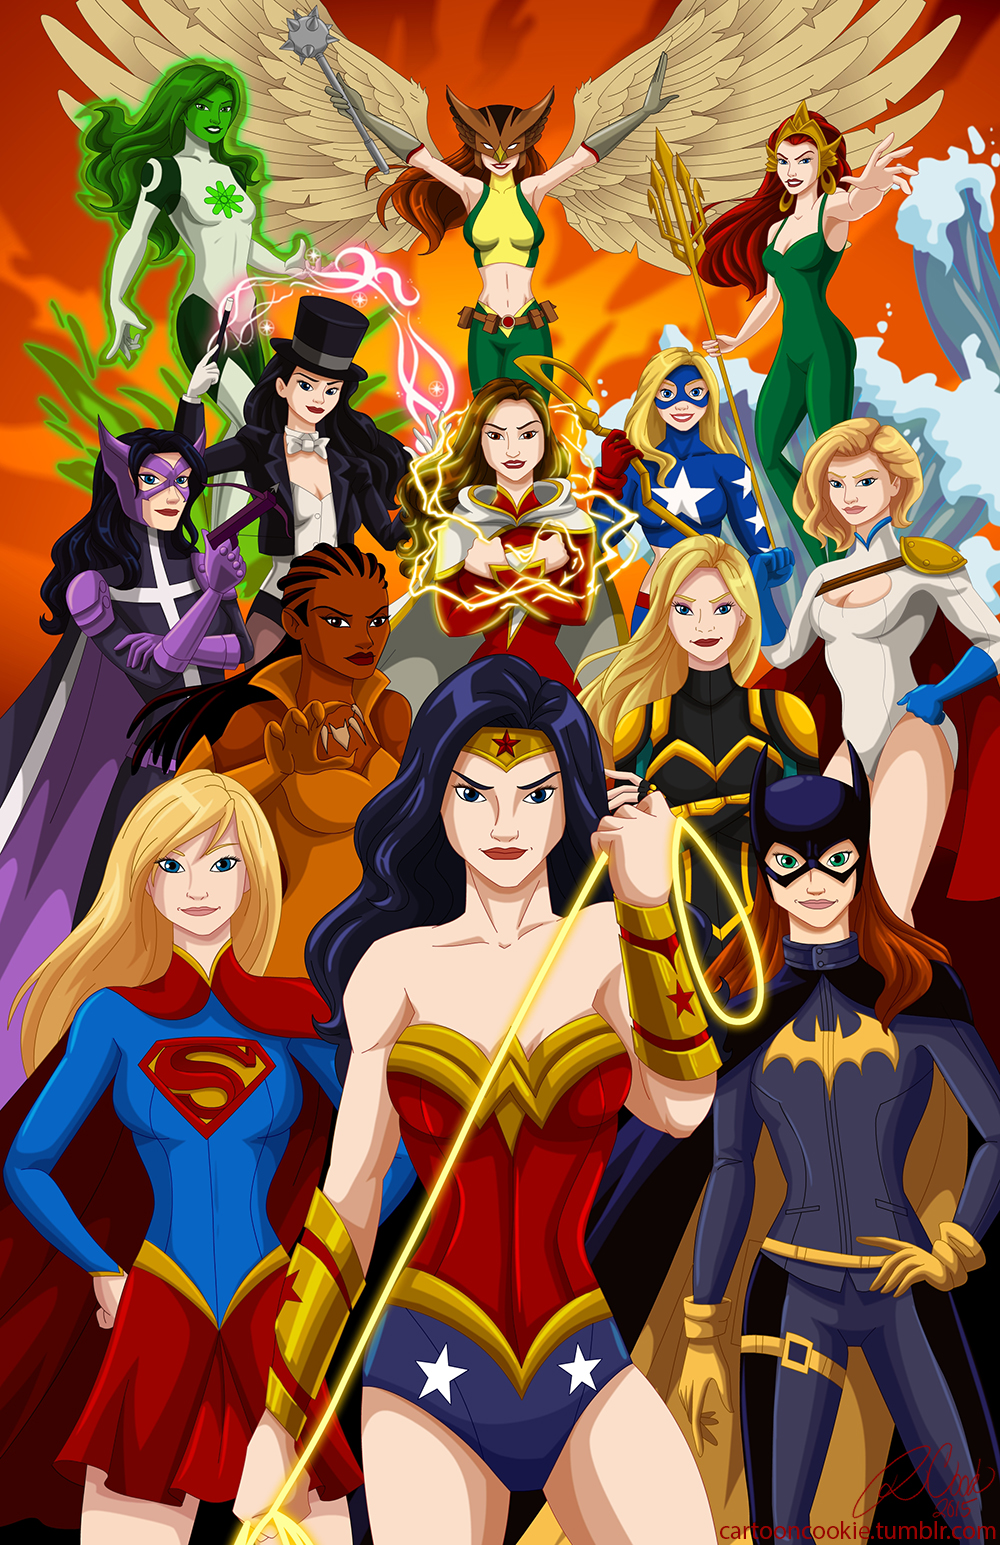 6+girls amazon arm arm_up armor arms arms_up barbara_gordon bare_legs bare_shoulders batgirl black_canary black_hair blonde_hair blue_eyes blue_gloves bodysuit bow bow_(weapon) bowtie bracelet braids breasts brown_hair cape claws cleavage cleavage_cutout collarbone courtney_whitmore crossbow dark_skin dc_comics detached_collar everyone female flying gloves green_hair green_skin grey_gloves grin hand_on_hip hat hawkgirl holding huntress jade jade_(dc) jewelry kryptonian legs leotard lips lipstick long_hair looking_at_viewer mace magic magician makeup mari_jiwe_mccabe mary_batson mask masquerade mera midriff multiple_girls navel neck necklace outstretched_arm pink_lipstick power_girl purple_gloves queen red_cape red_gloves red_hair red_lipstick red_skirt s_shield short_hair single_spaulder skirt sleeveless smile spaulders standing stargirl strapless supergirl tiara top_hat trident turtleneck v-neck vixen_(dc) wand water weapon wonder_woman yellow_gloves zatanna_zatara